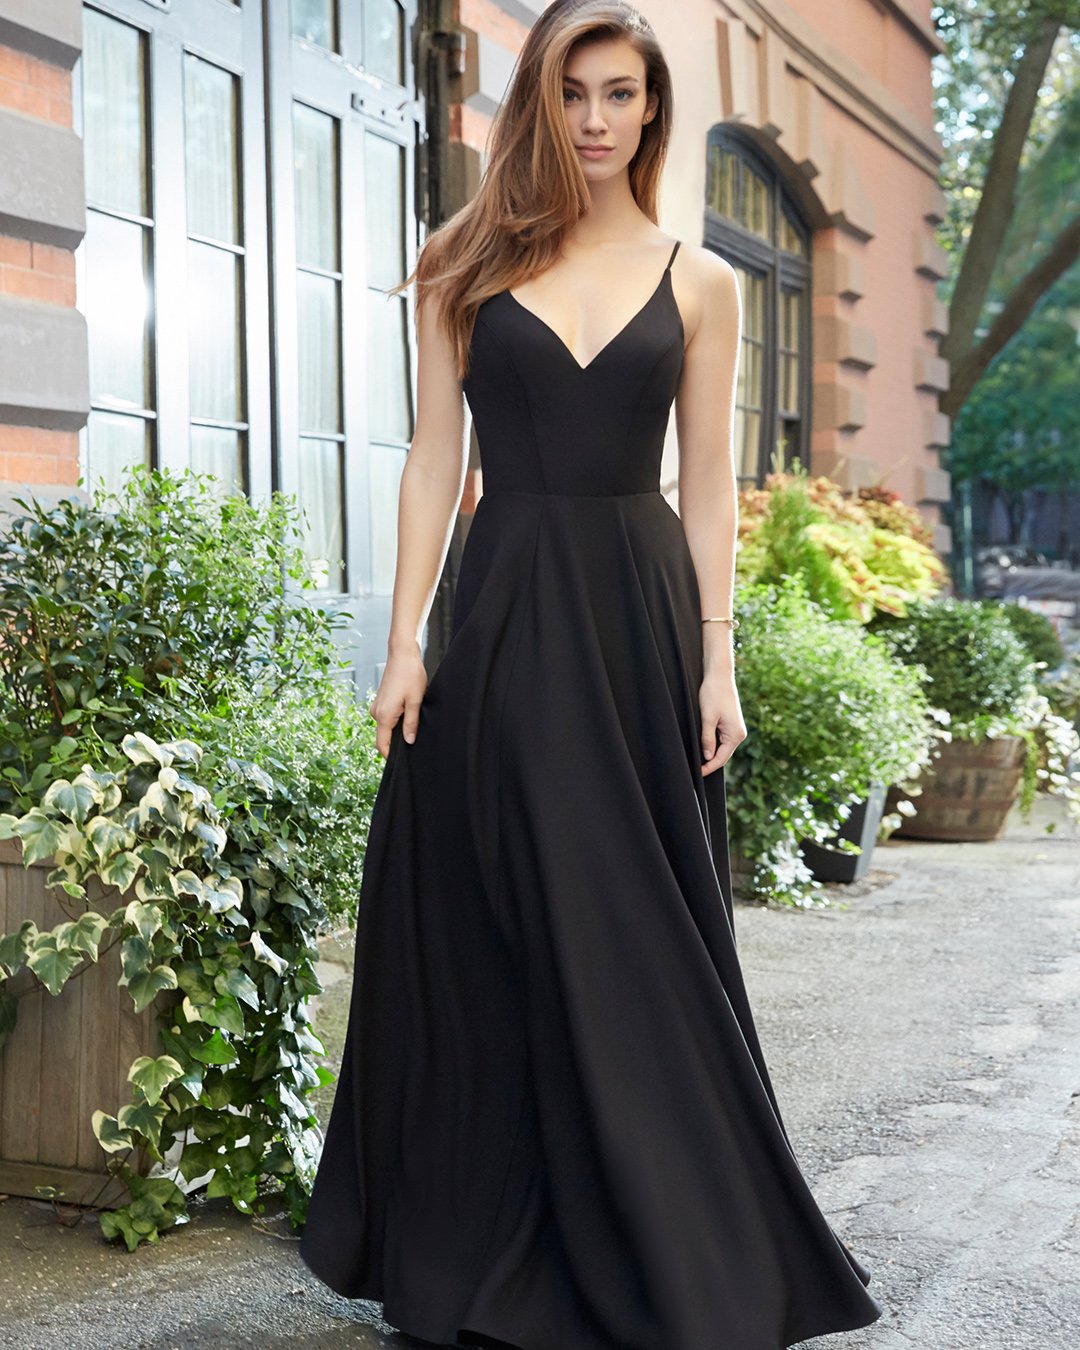 wedding black bridesmaid dresses long simple with spaghetti straps hayley paige